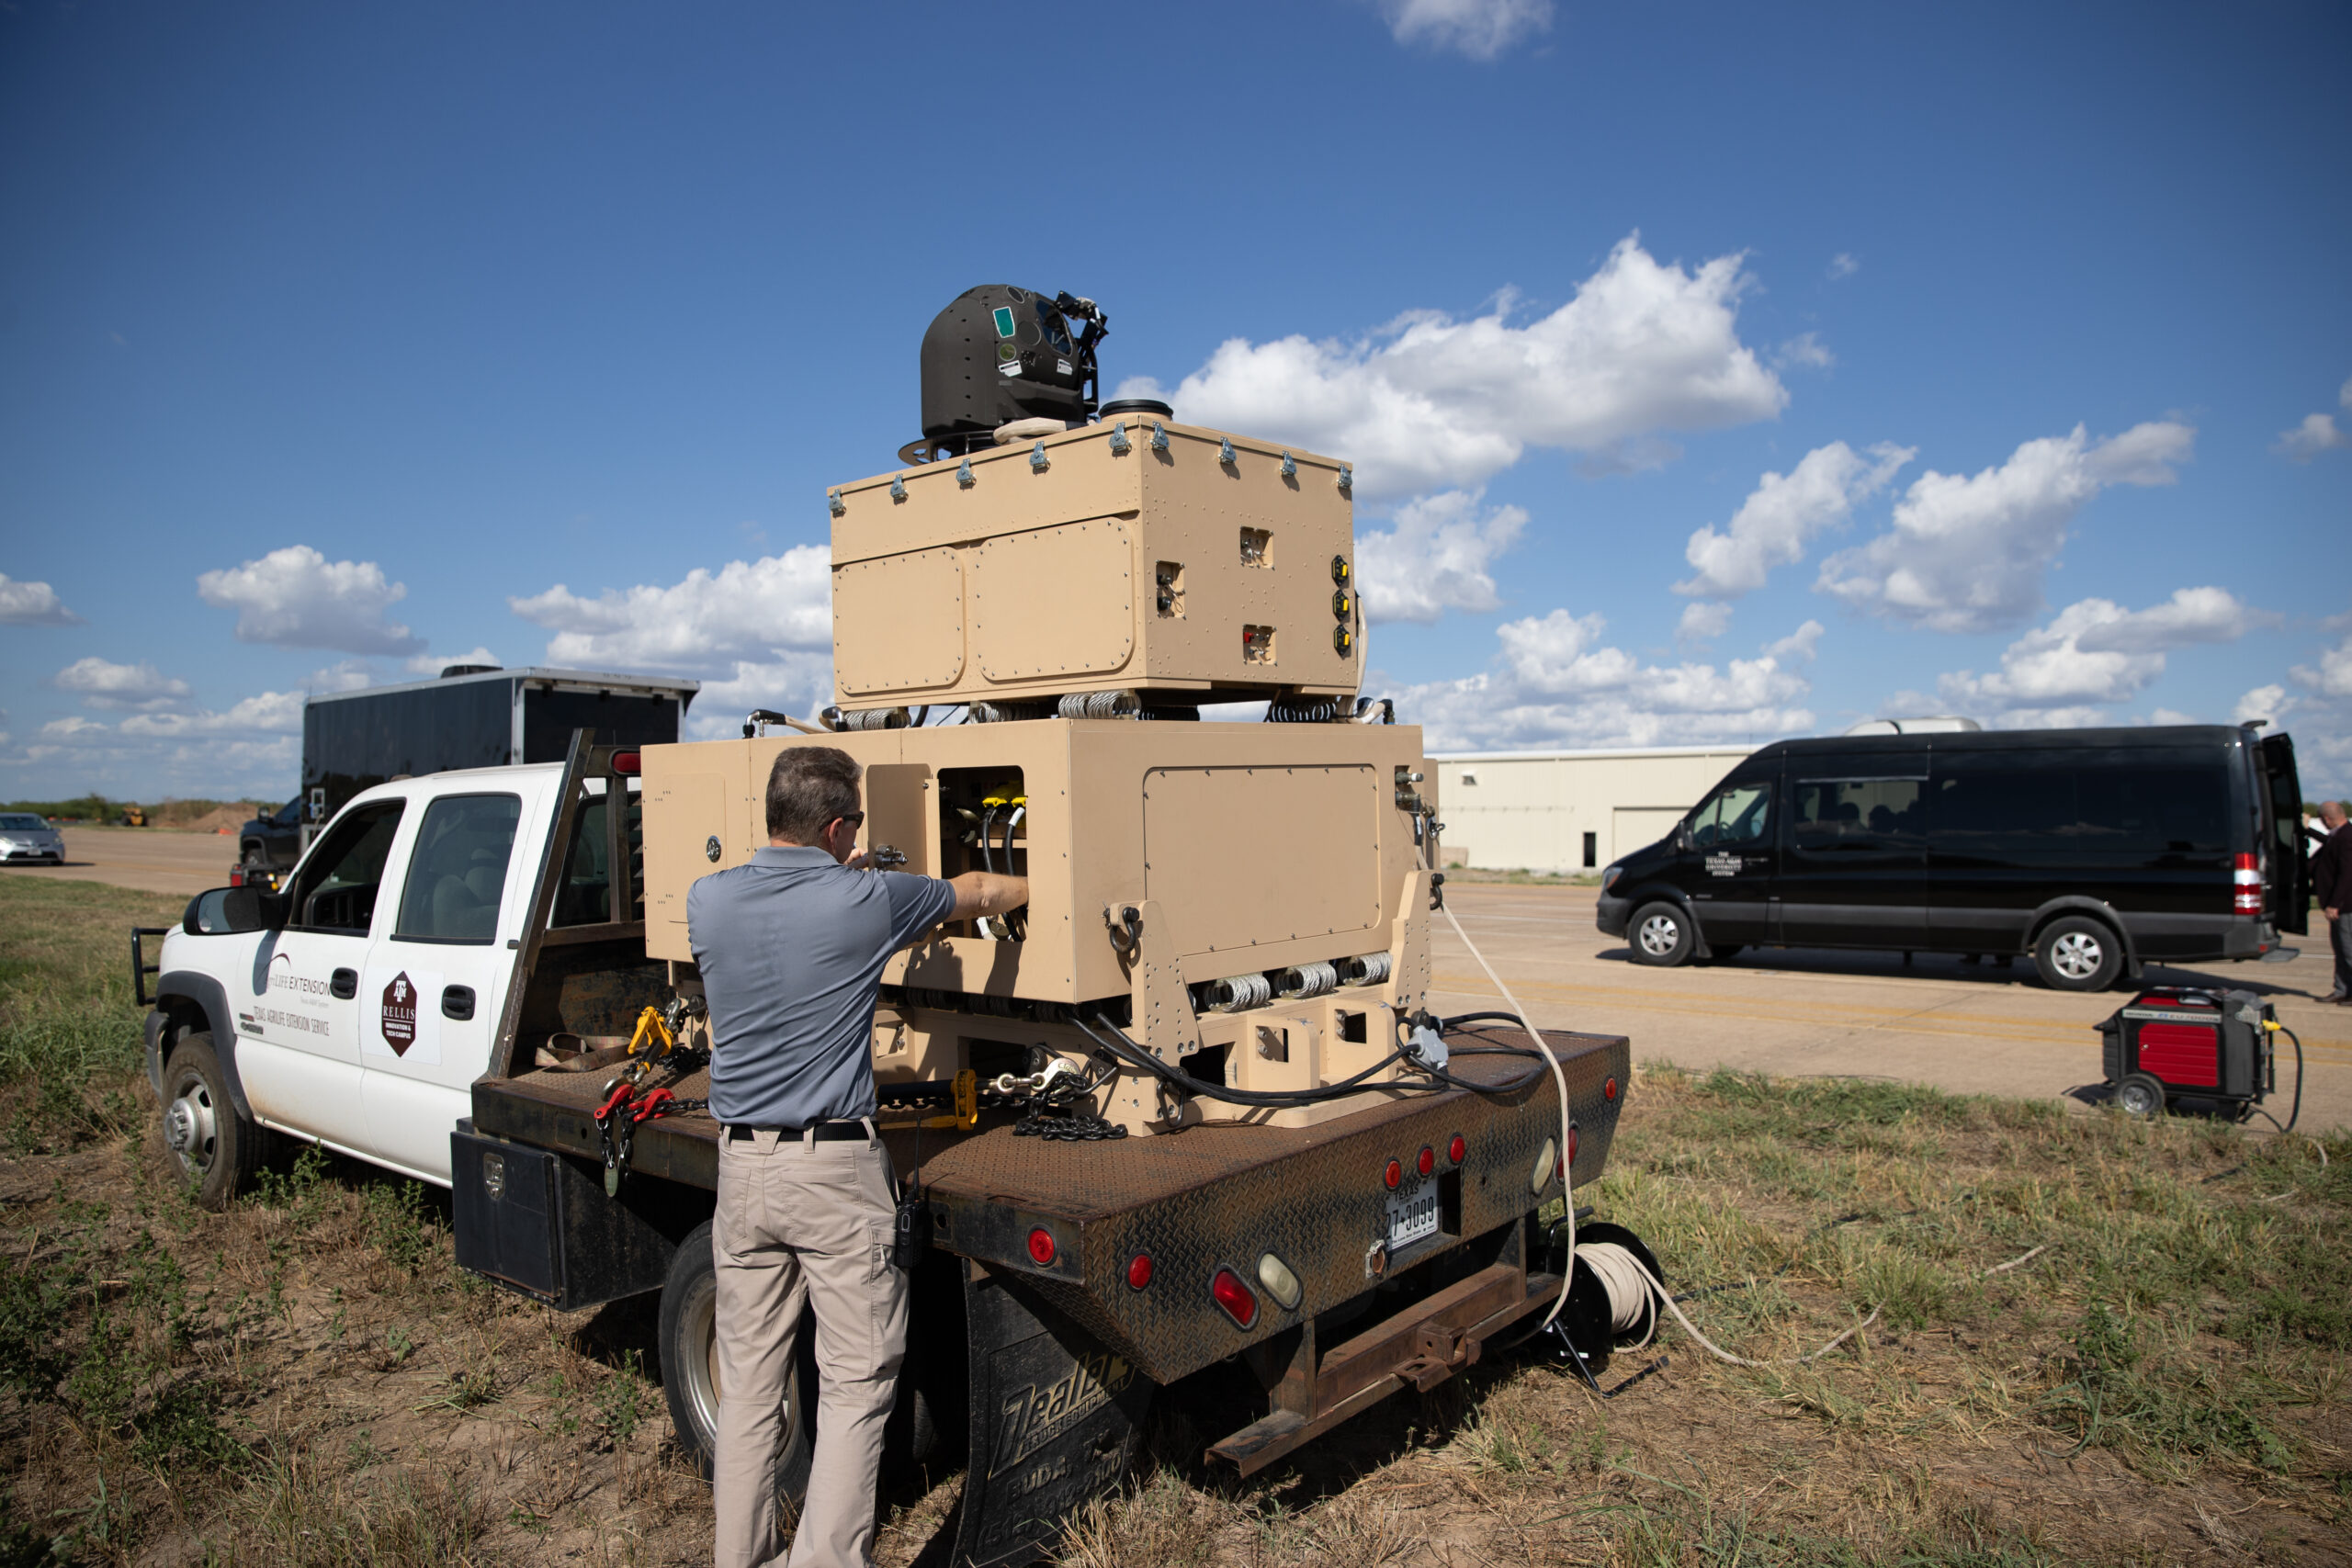 A Raytheon High Energy Laser system with a man working on it at the Texas A&M RELLIS campus.